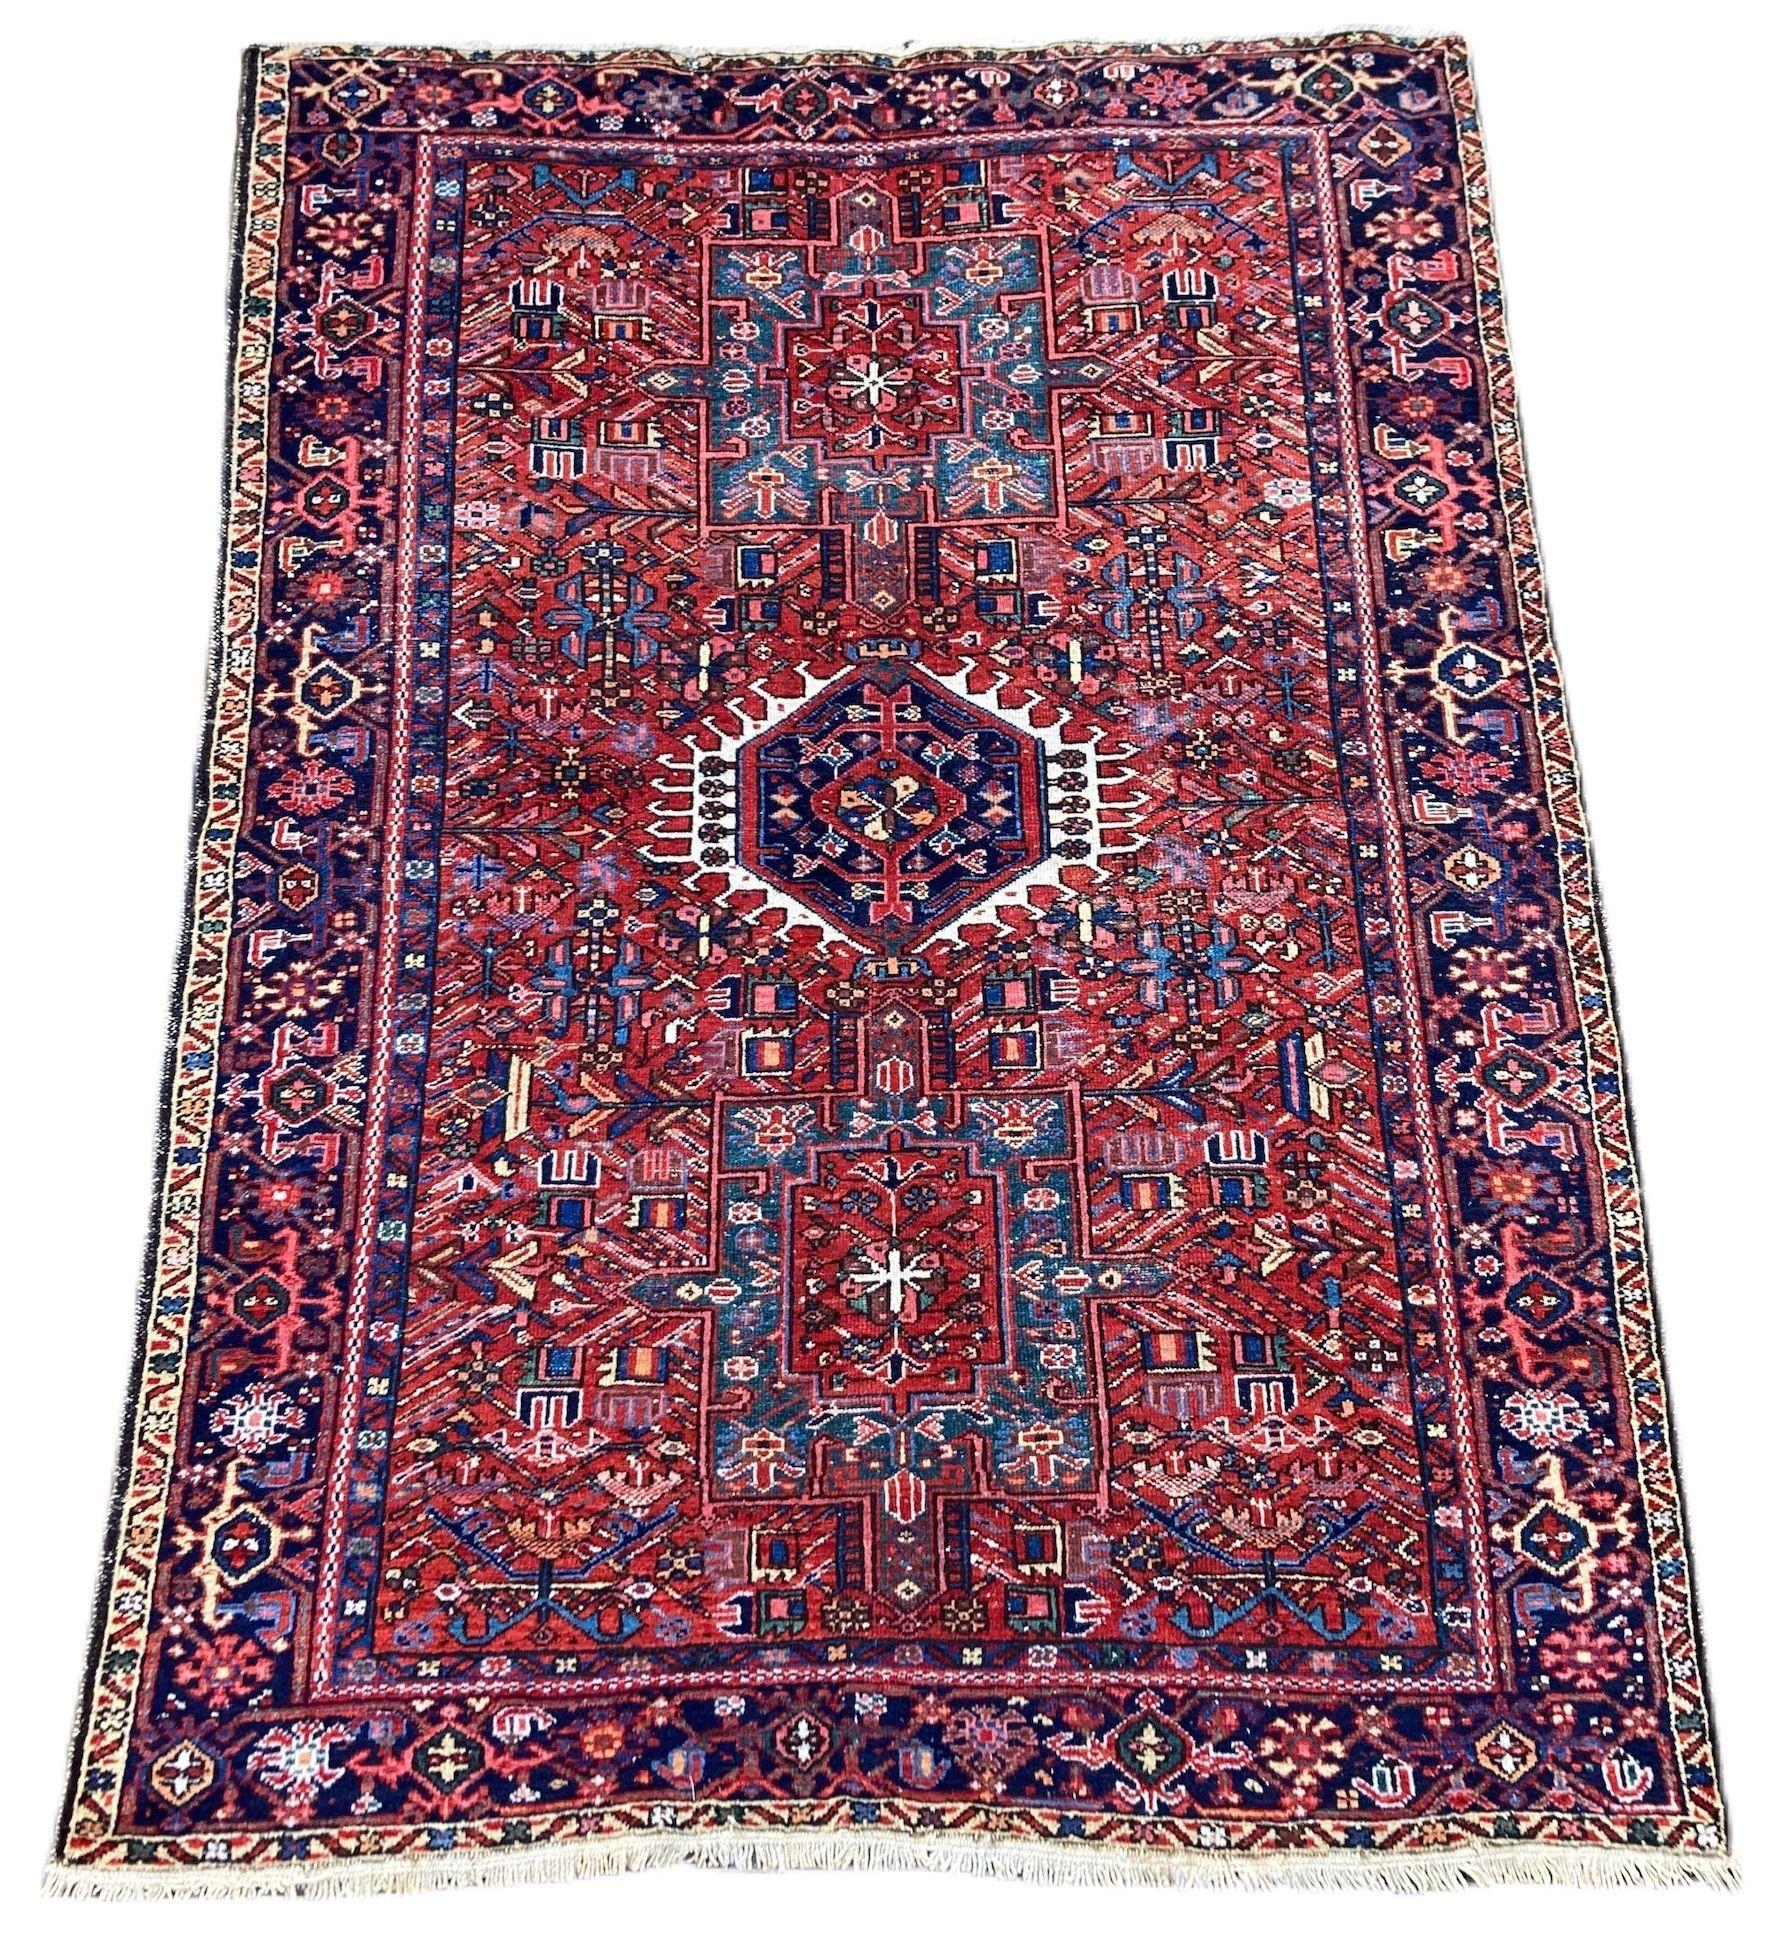 A beautiful antique Karadja rug, handwoven circa 1910 with a geometrical 3 medallion design on a terracotta field and deep indigo border. Fabulous secondary colours, especially the teal blue in the medallions and a highly decorative piece.

Size: